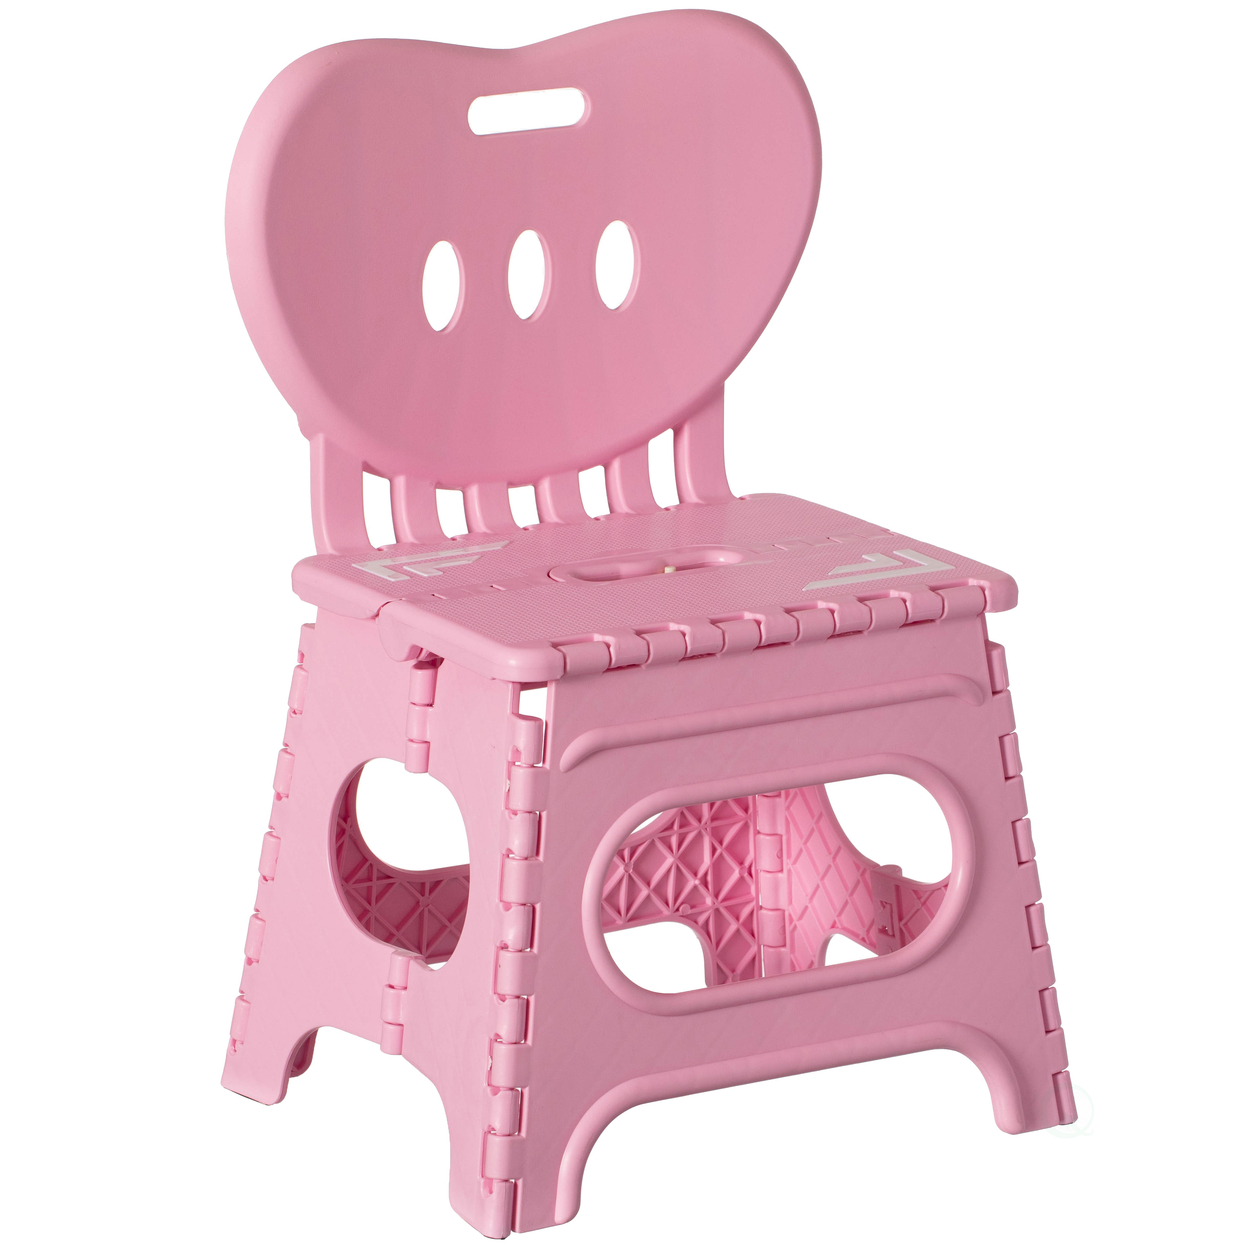 Plastic Foldable Step Stool With Back Support, Heart Shaped Backrest, Portable Chair With Handle, Kids Stepping Stool And Bathroom Stool - P